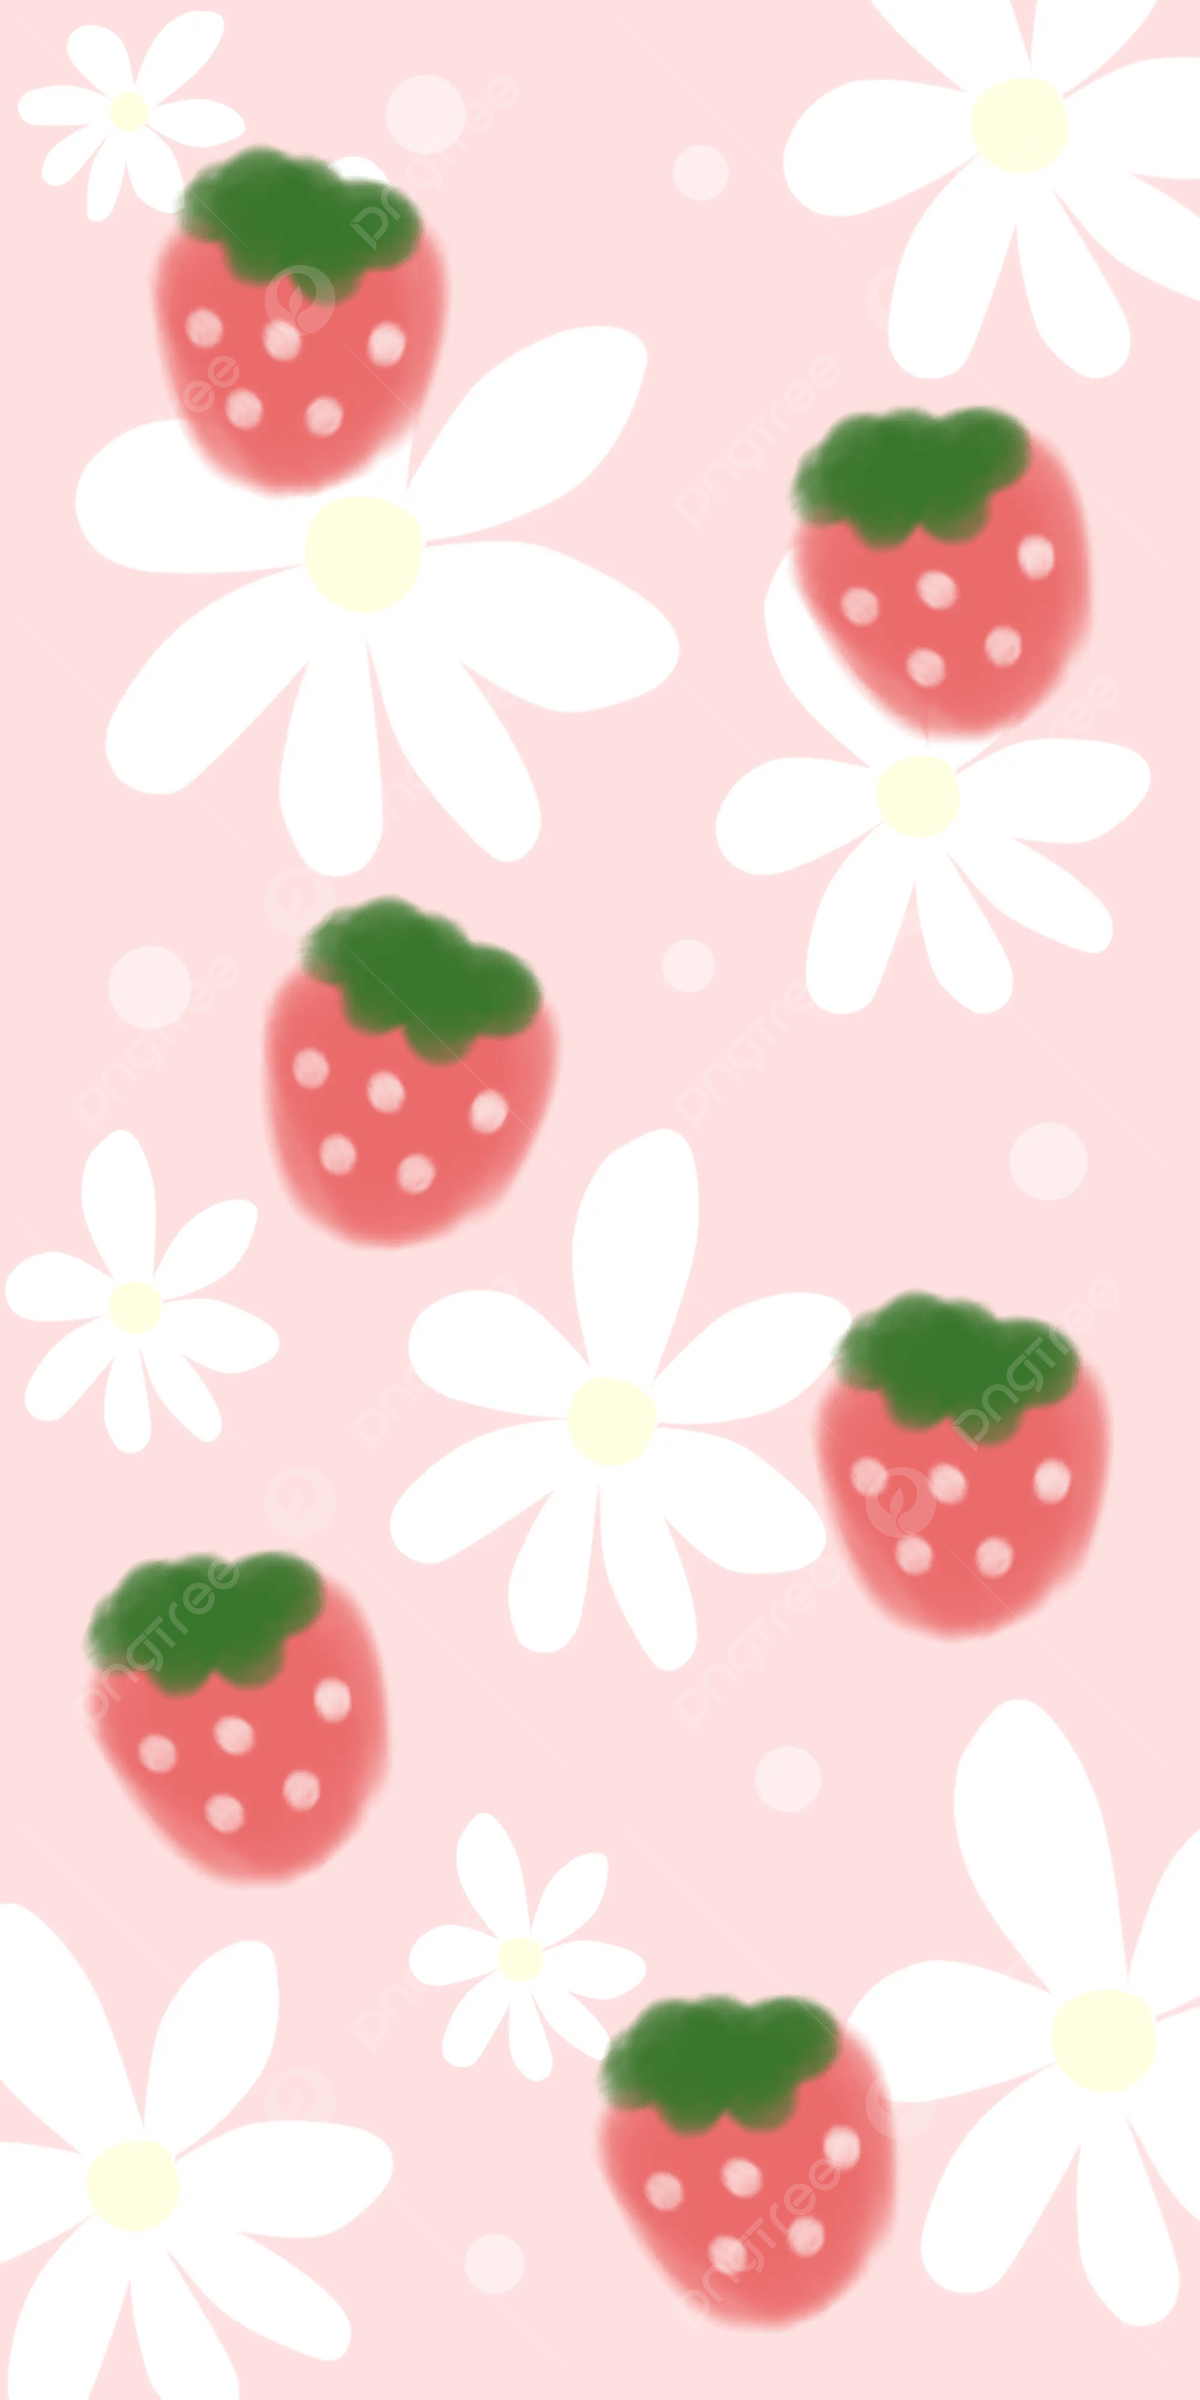 Cute Strawberry And Flowers Wallpaper Background Wallpaper Image For Free Download